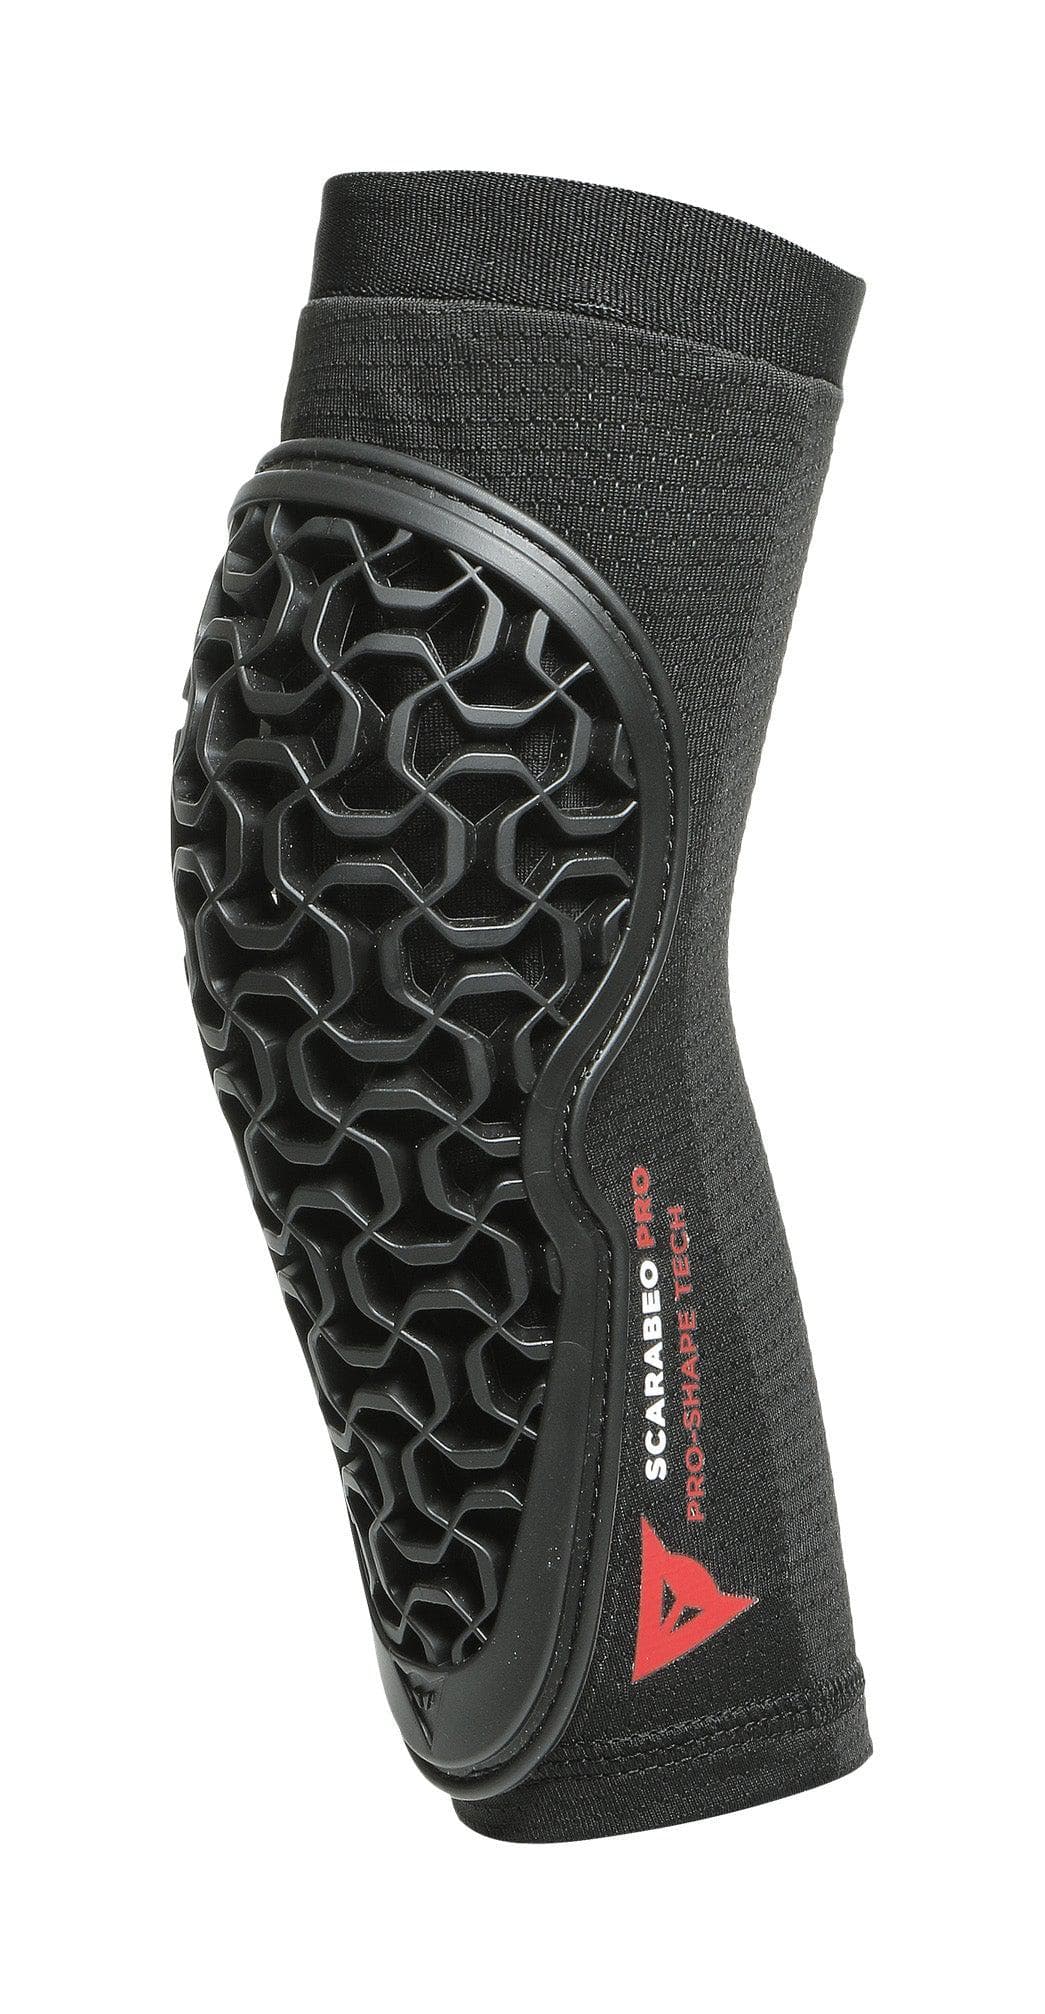 Dainese Scarabeo Pro Juniour Elbow Guards (Black, S)